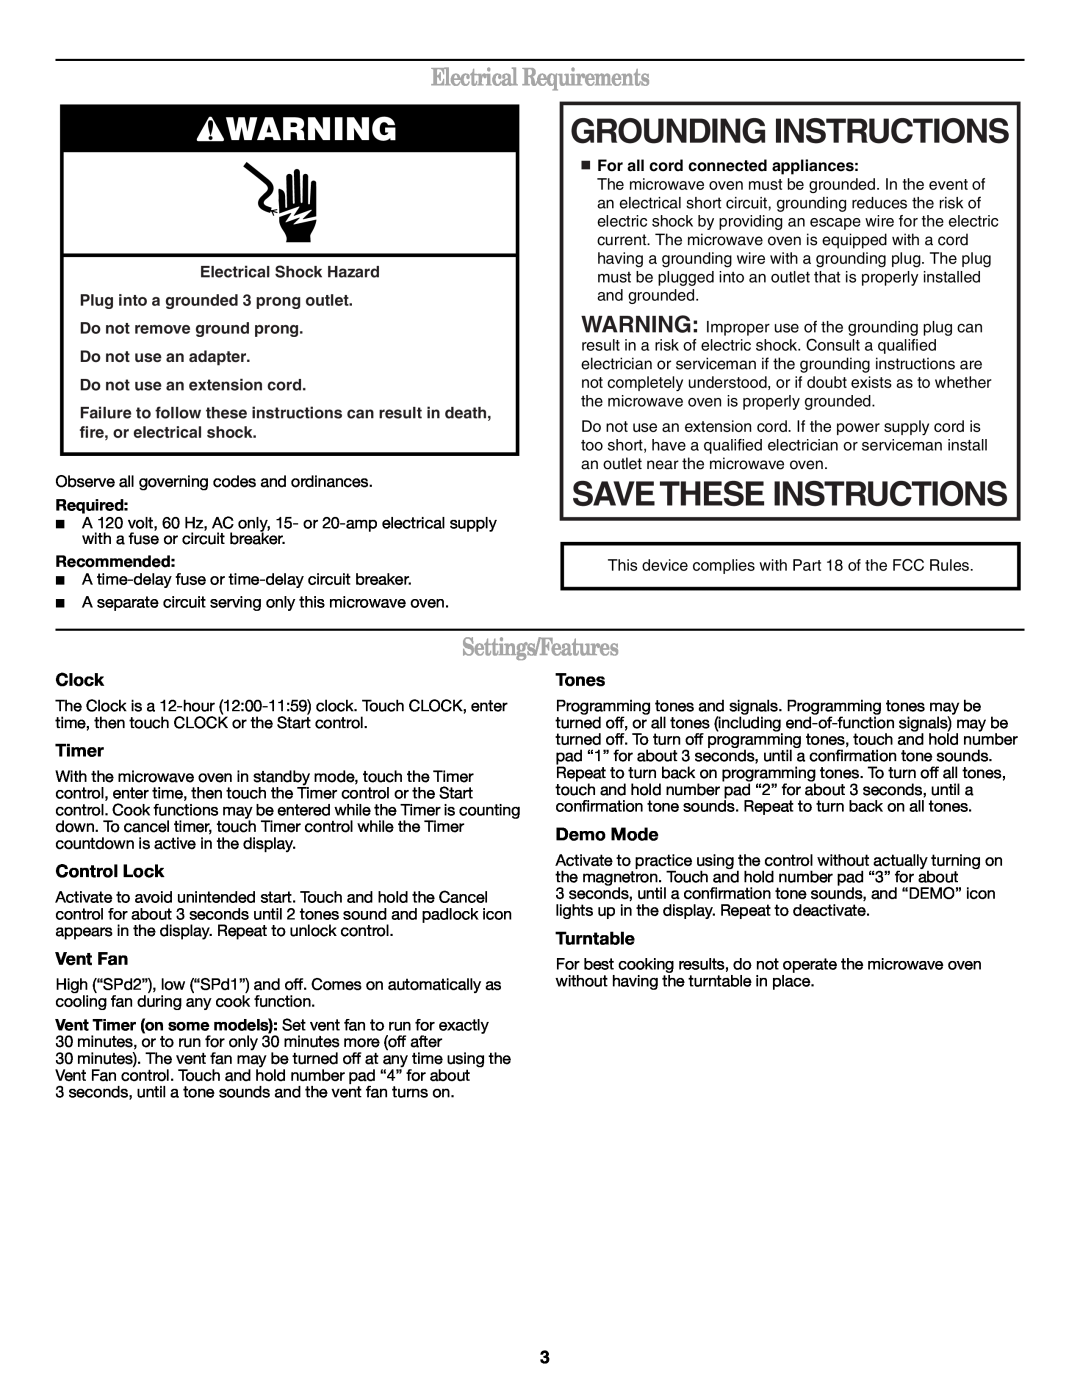 Whirlpool W10451739B Grounding Instructions, Electrical Requirements, Settings/Features, Save These Instructions 